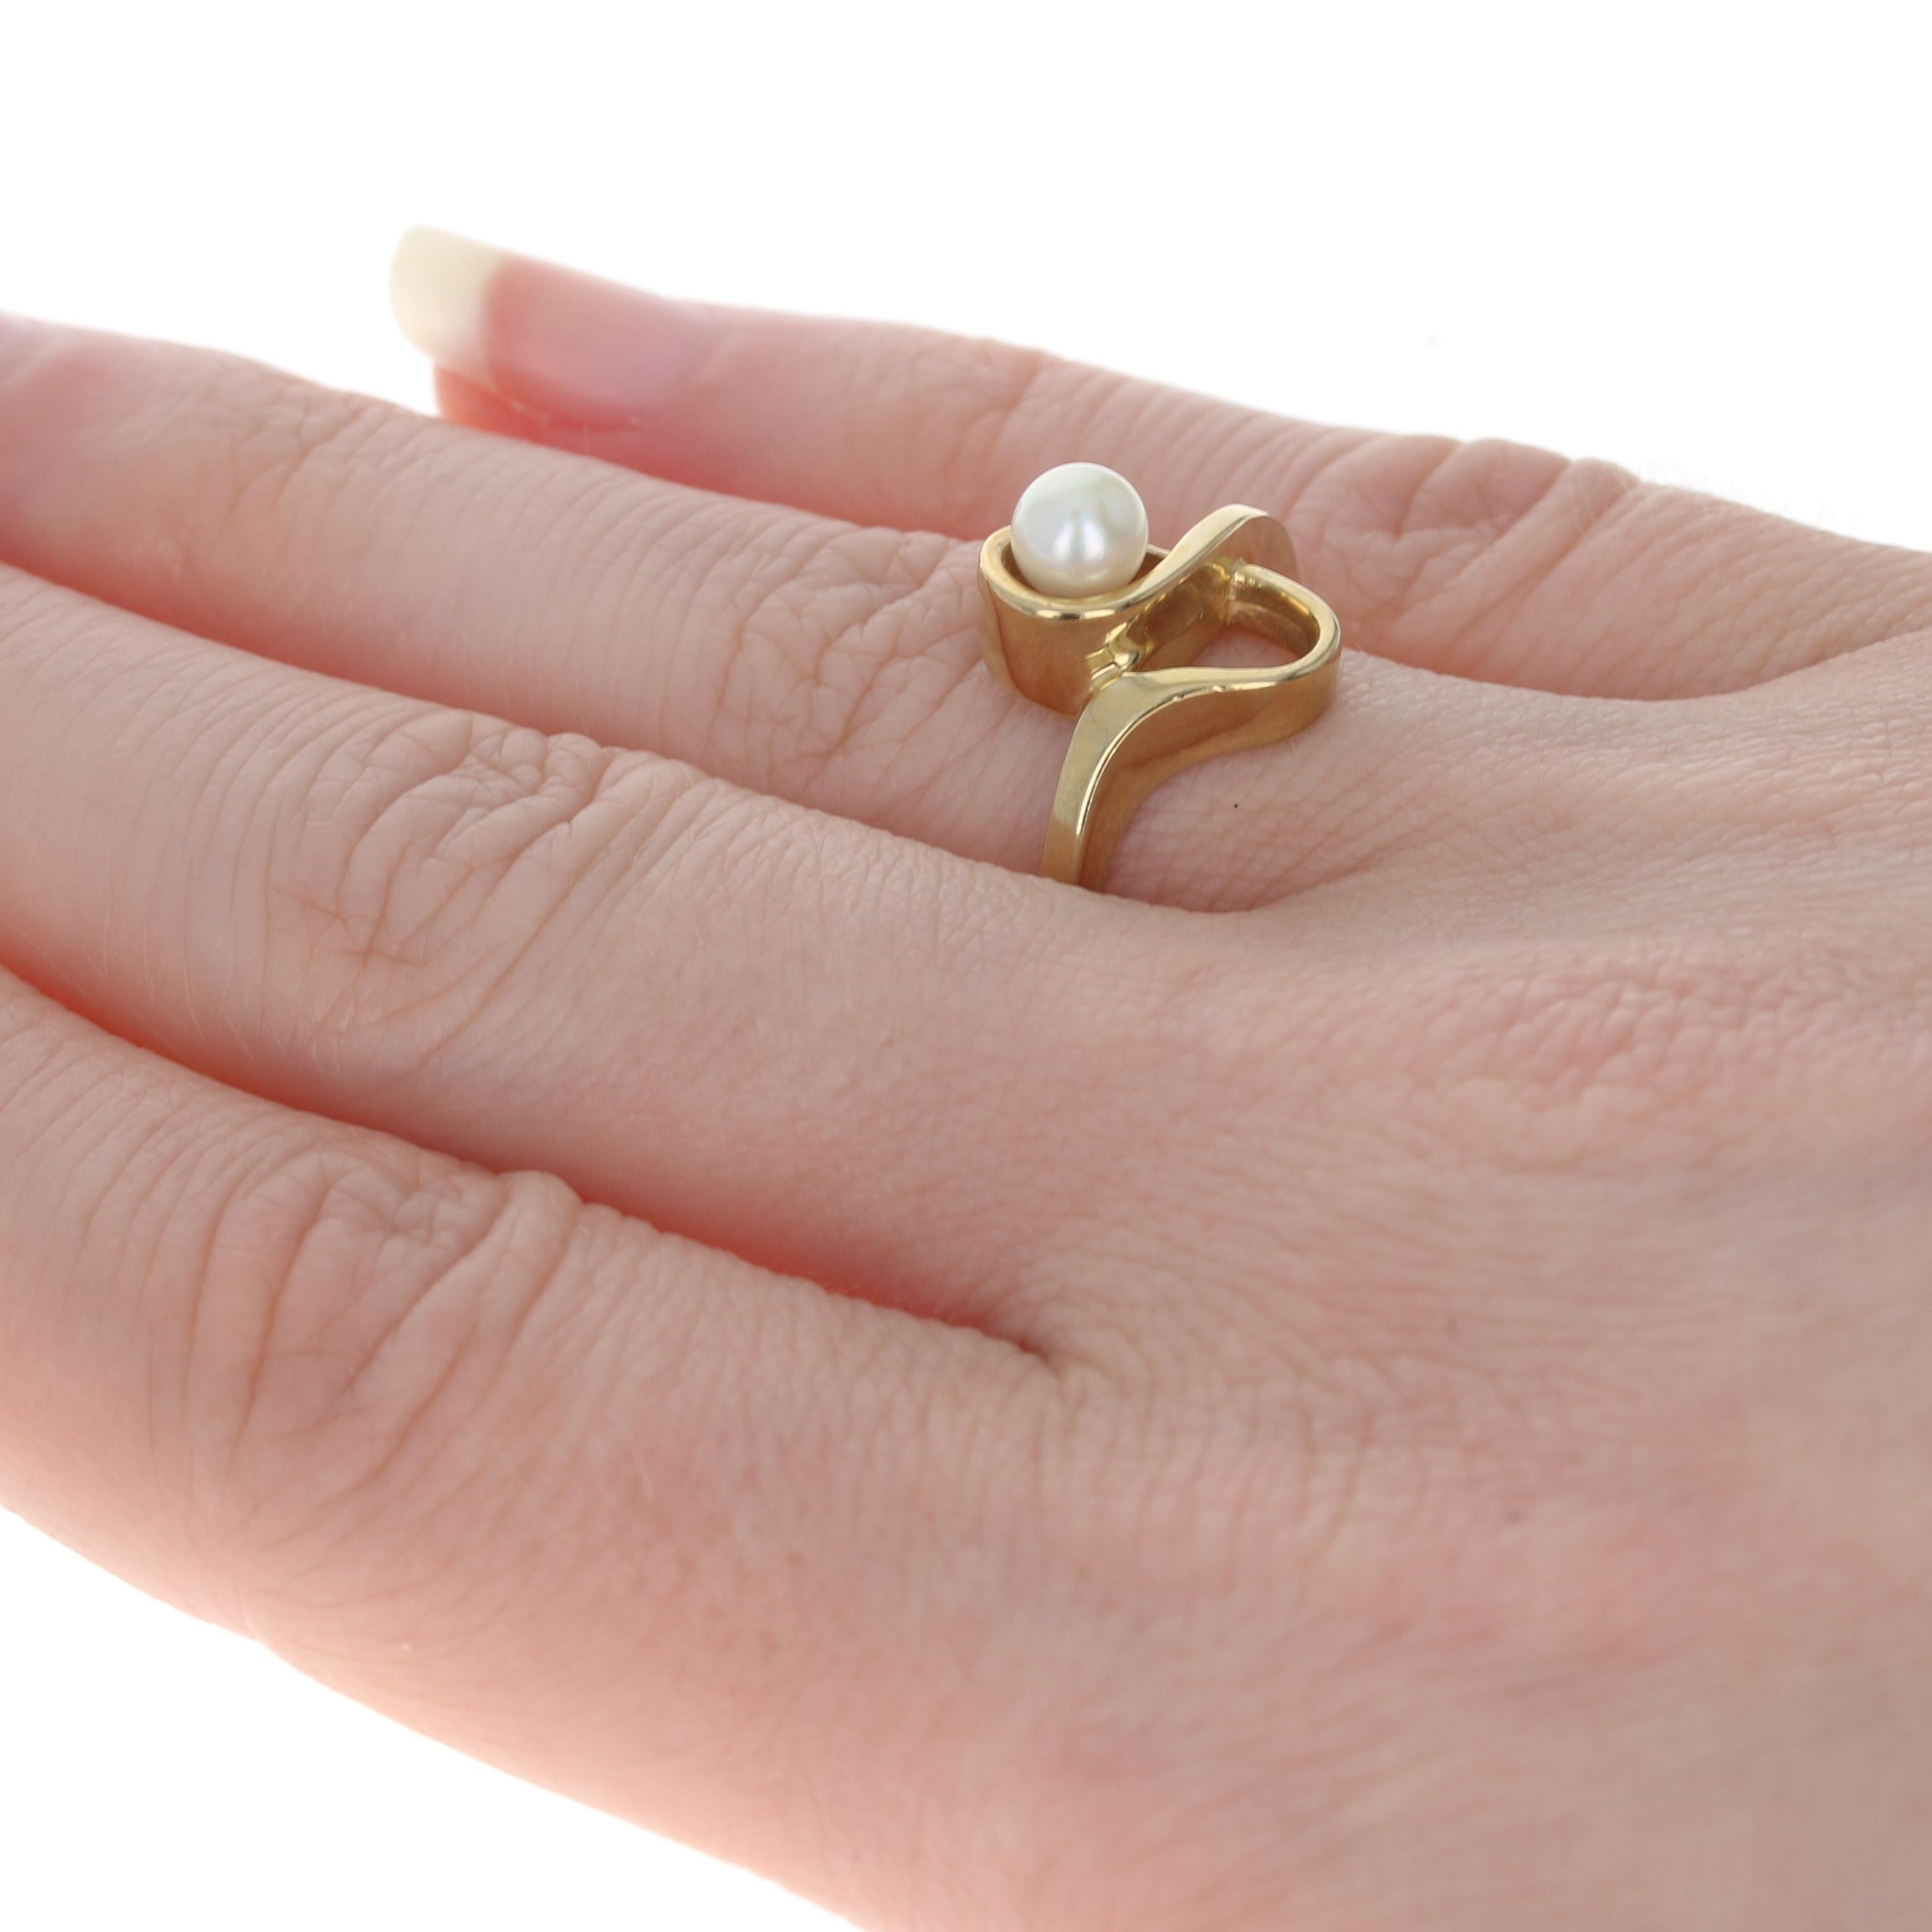 New Cultured Pearl Ring, 14k Yellow Gold Solitaire Bypass 4